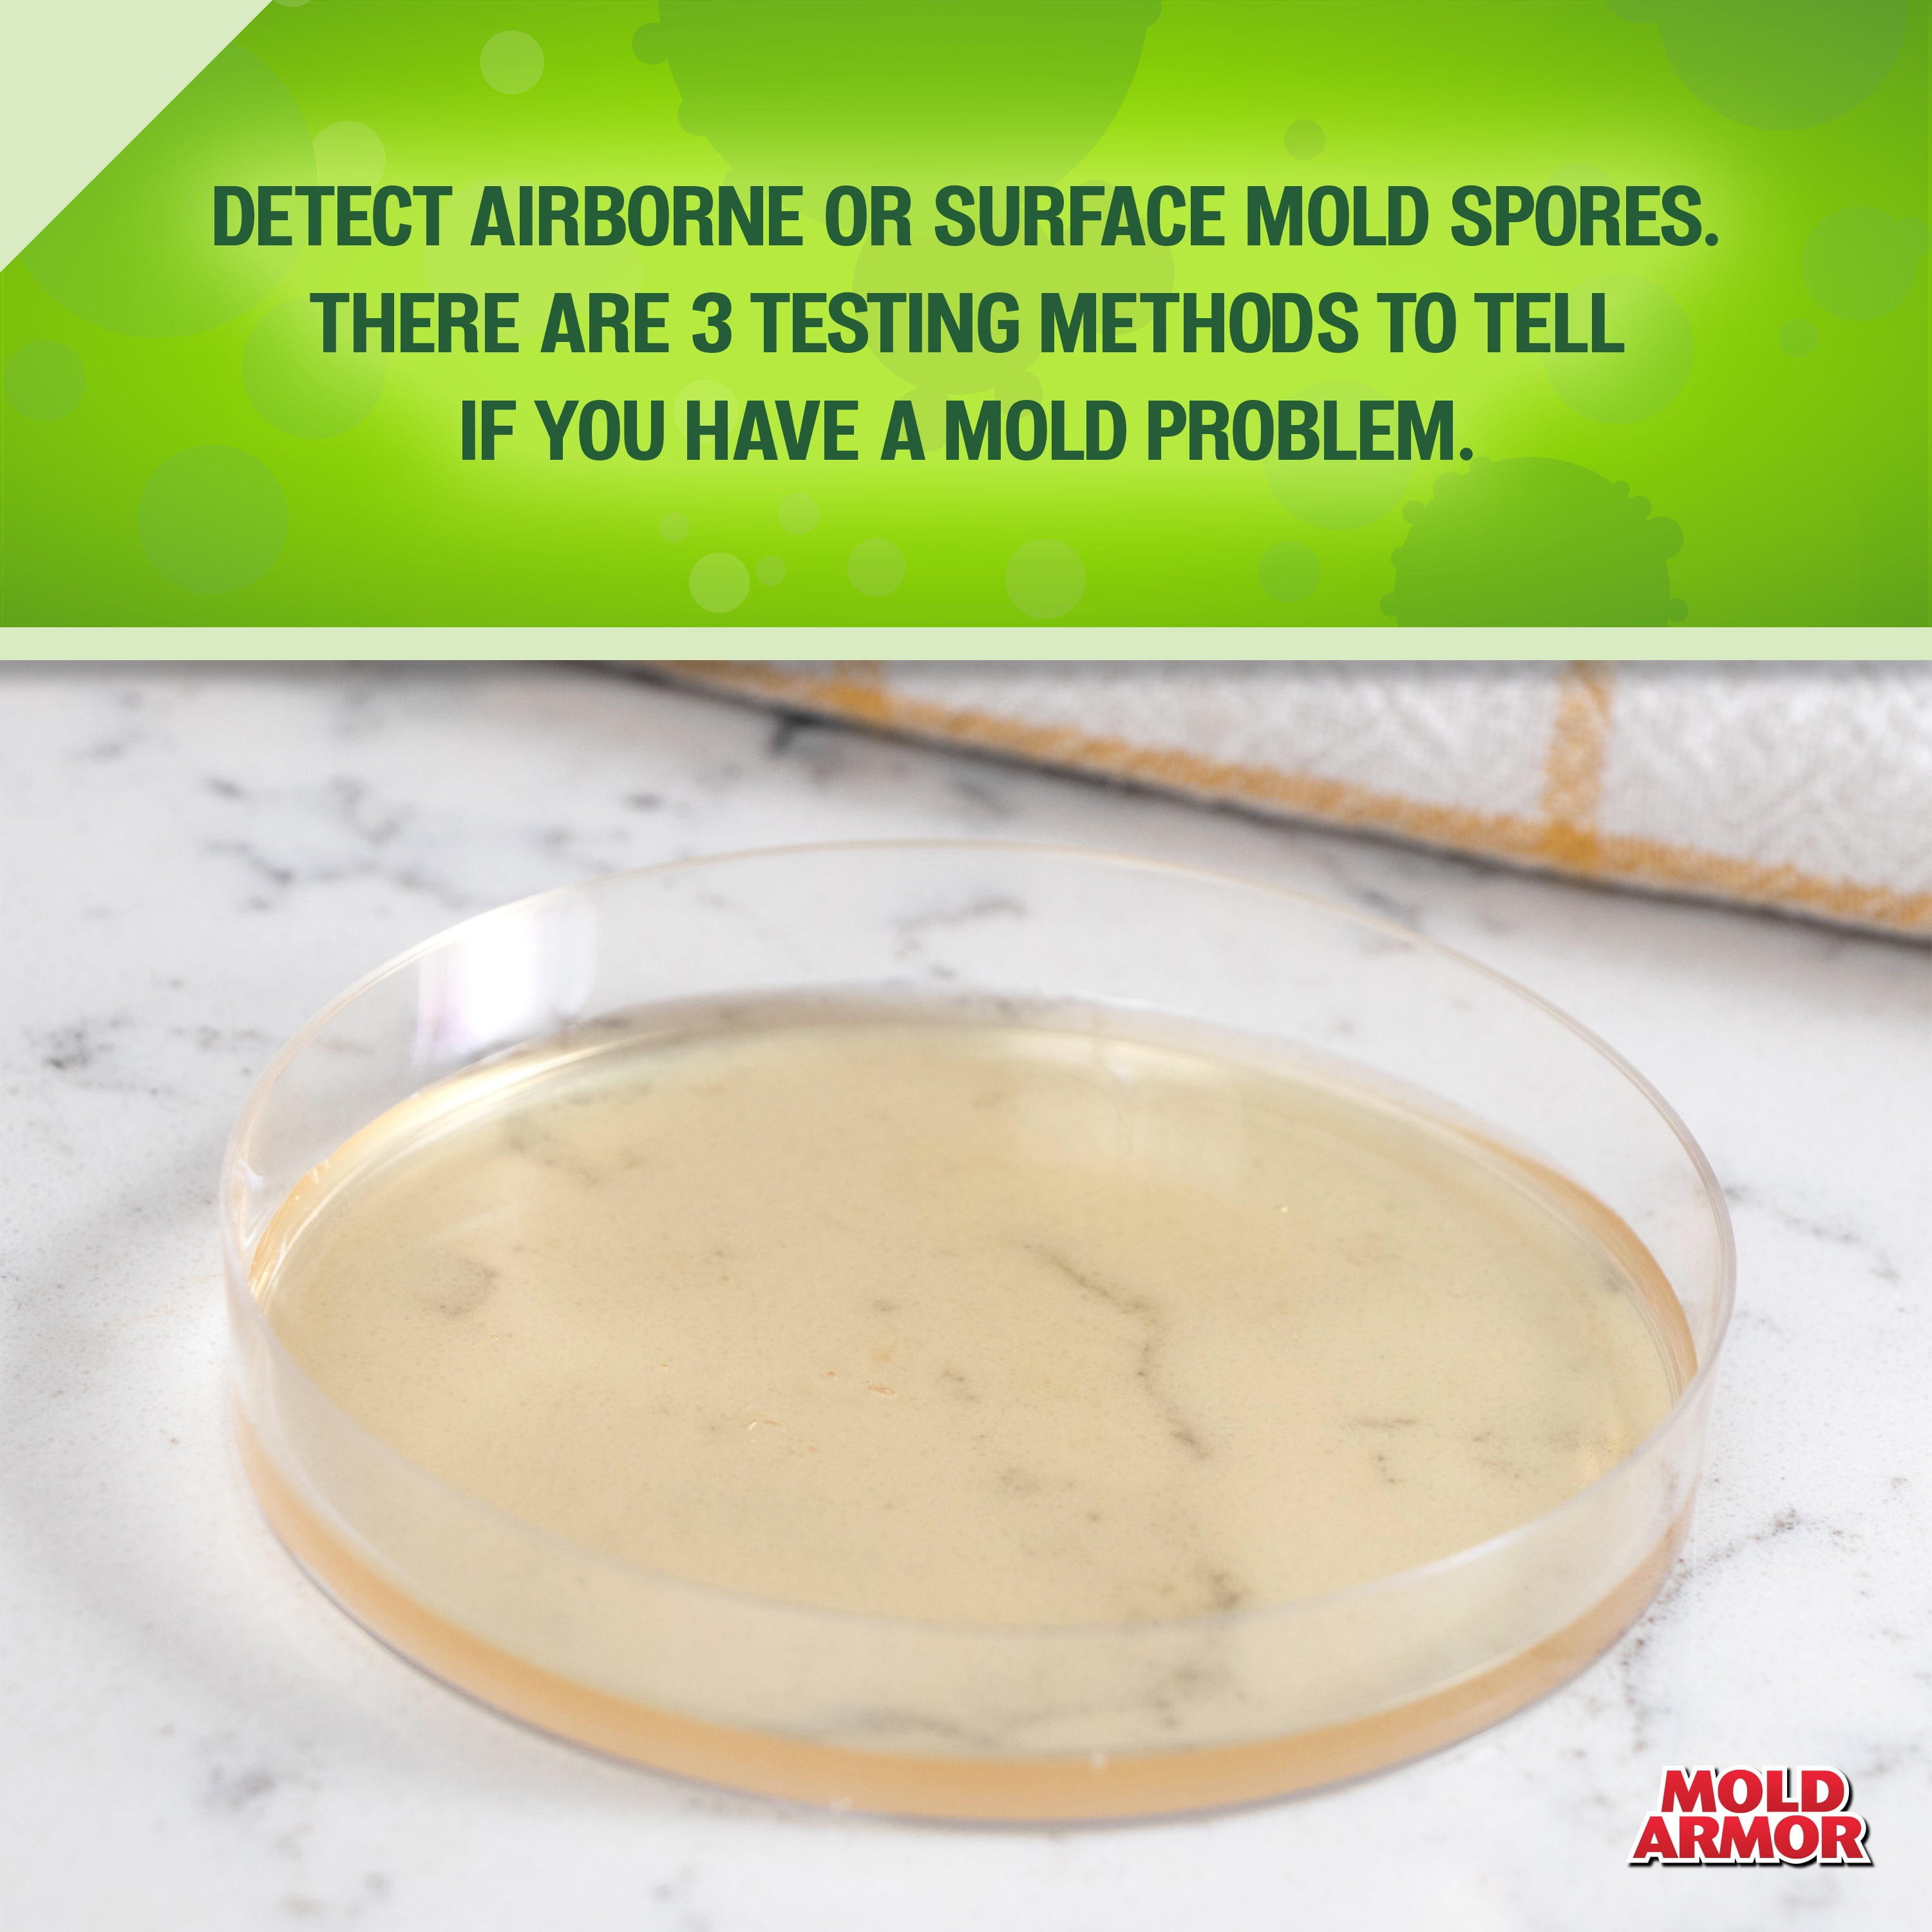 At home mold test, I know they aren't super accurate but I have